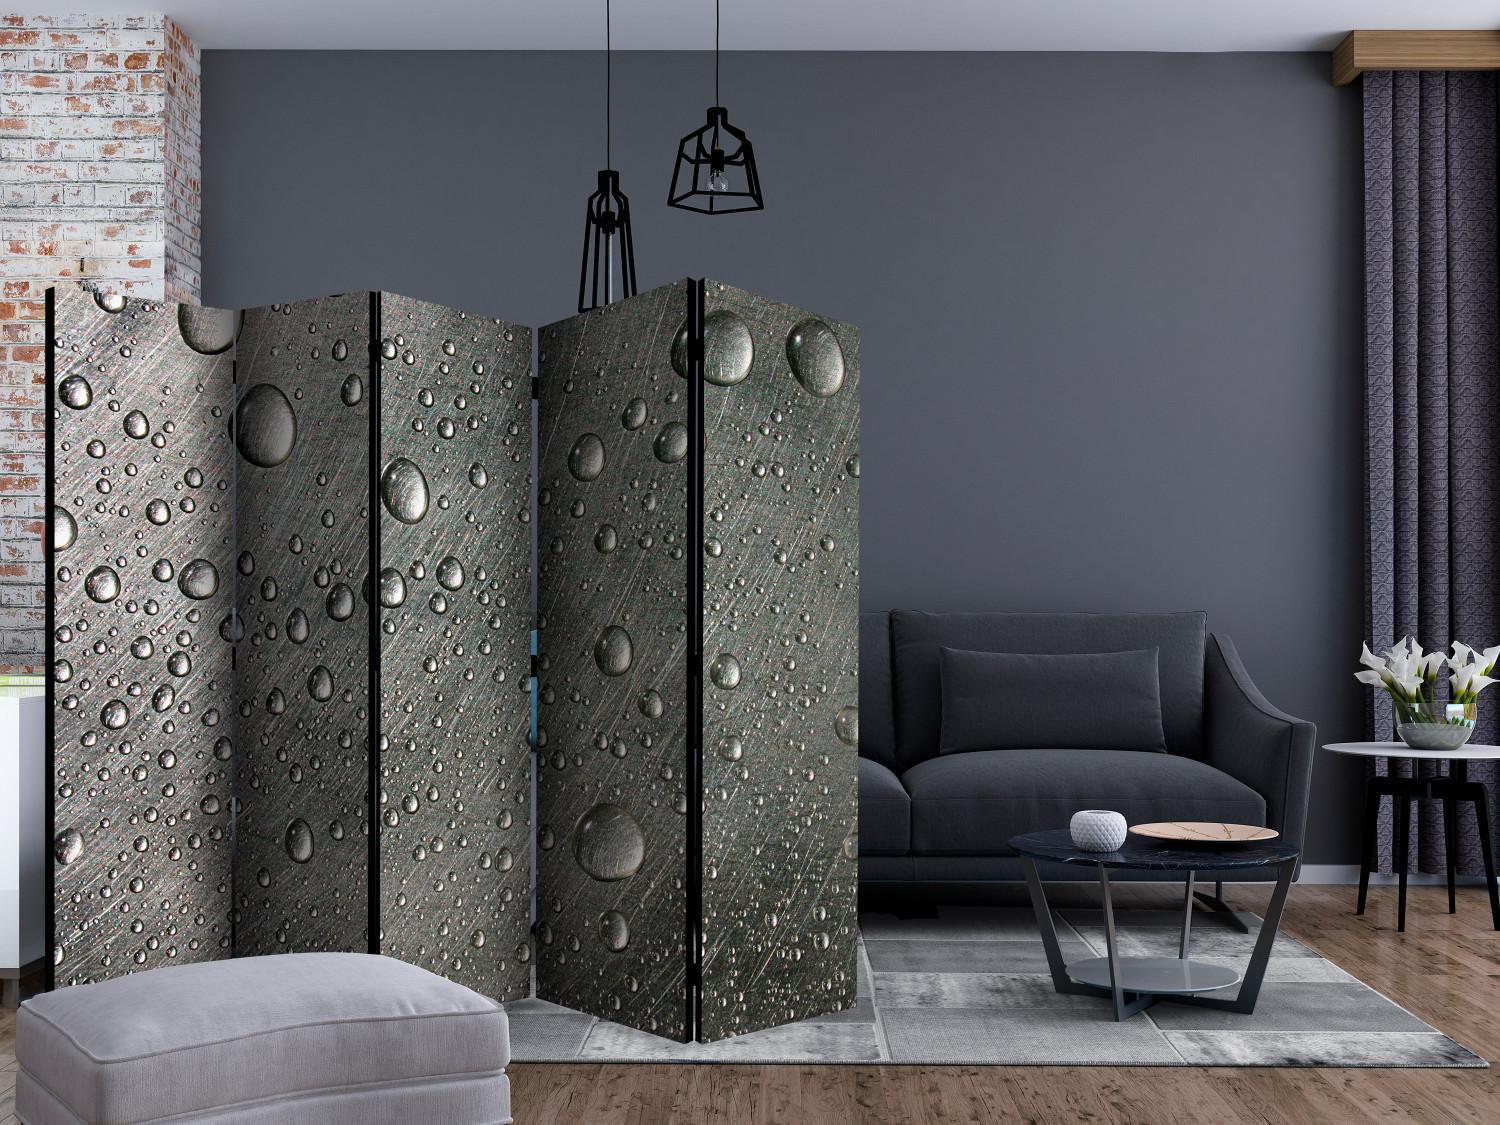 Room Divider Steel Surface with Water Drops II (5-piece) - gray pattern